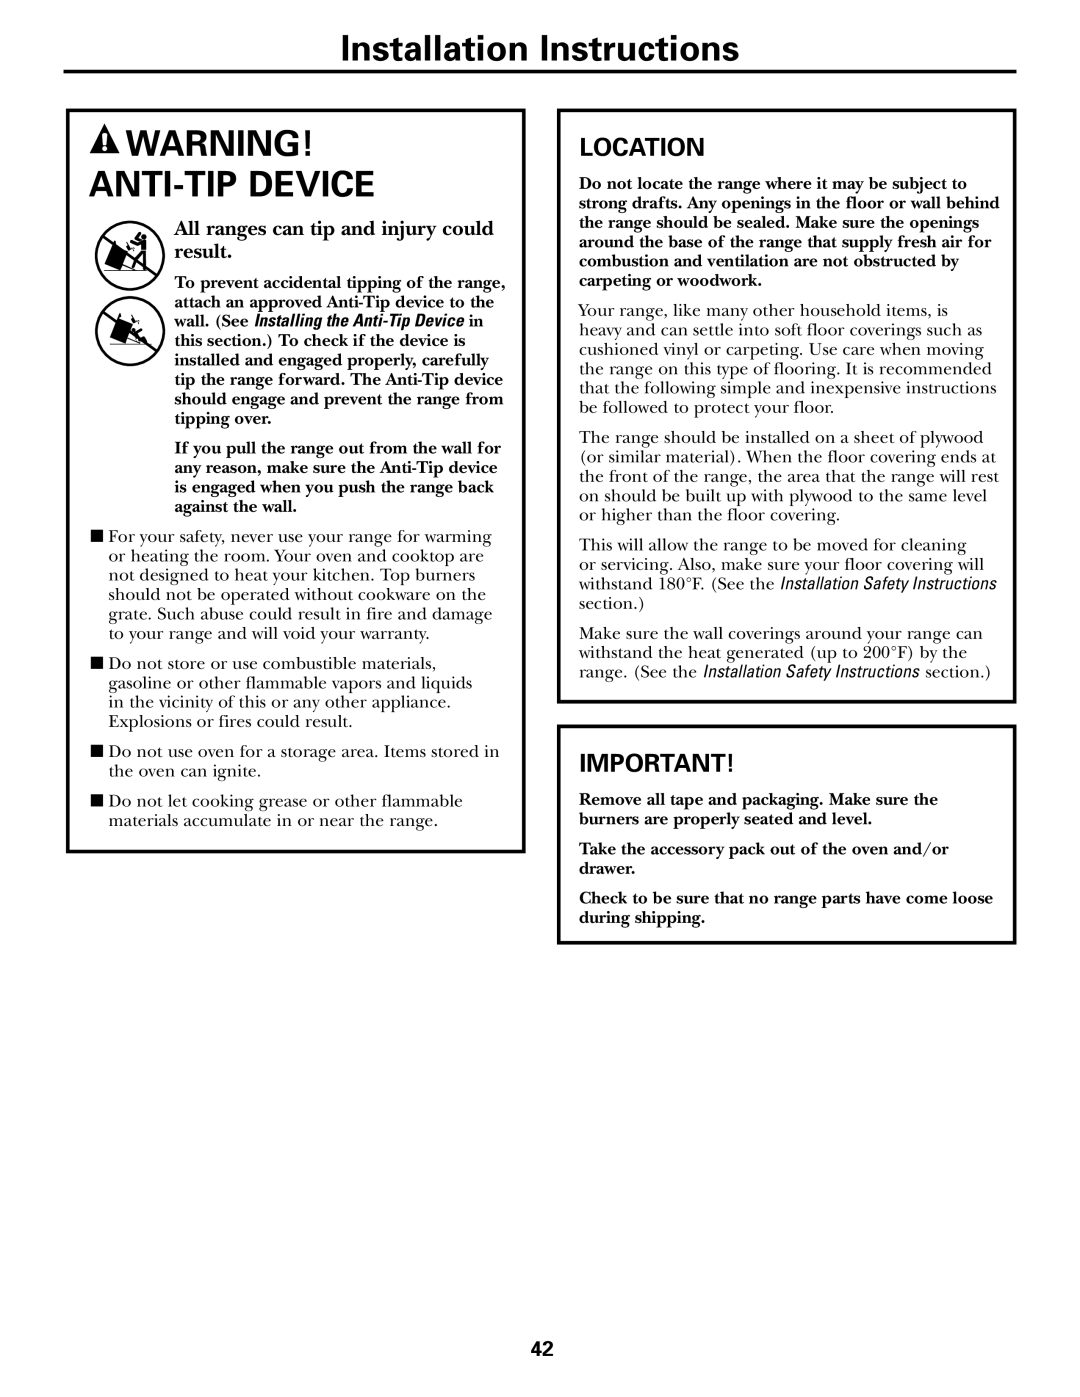 GE CGS980 Anti-Tip Device, Location, Installation Instructions, All ranges can tip and injury could result 